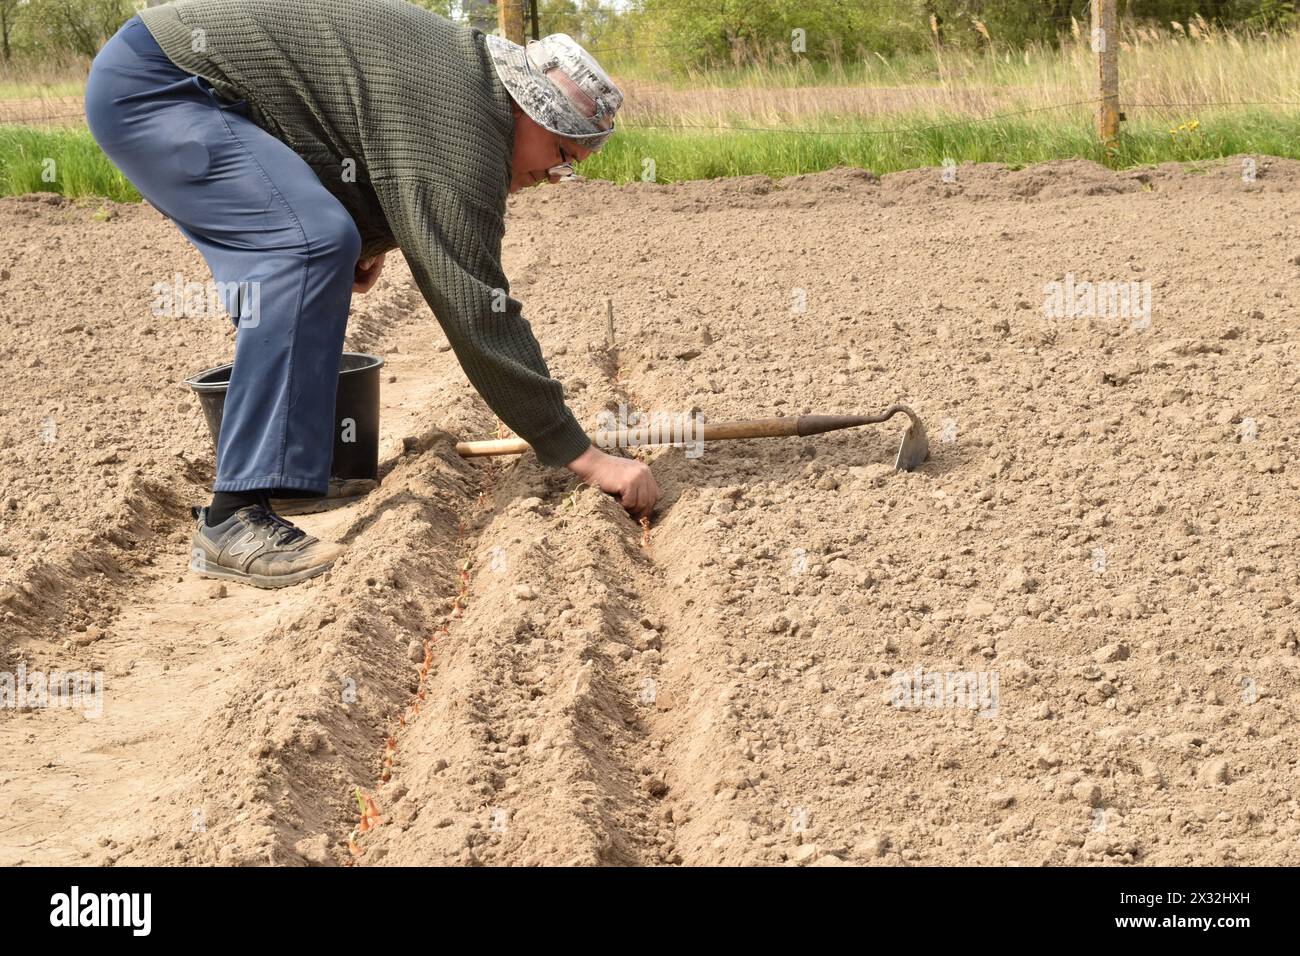 The photo shows the moment of planting onions in the soil in the garden. A man plants an onion with his hands. Stock Photo